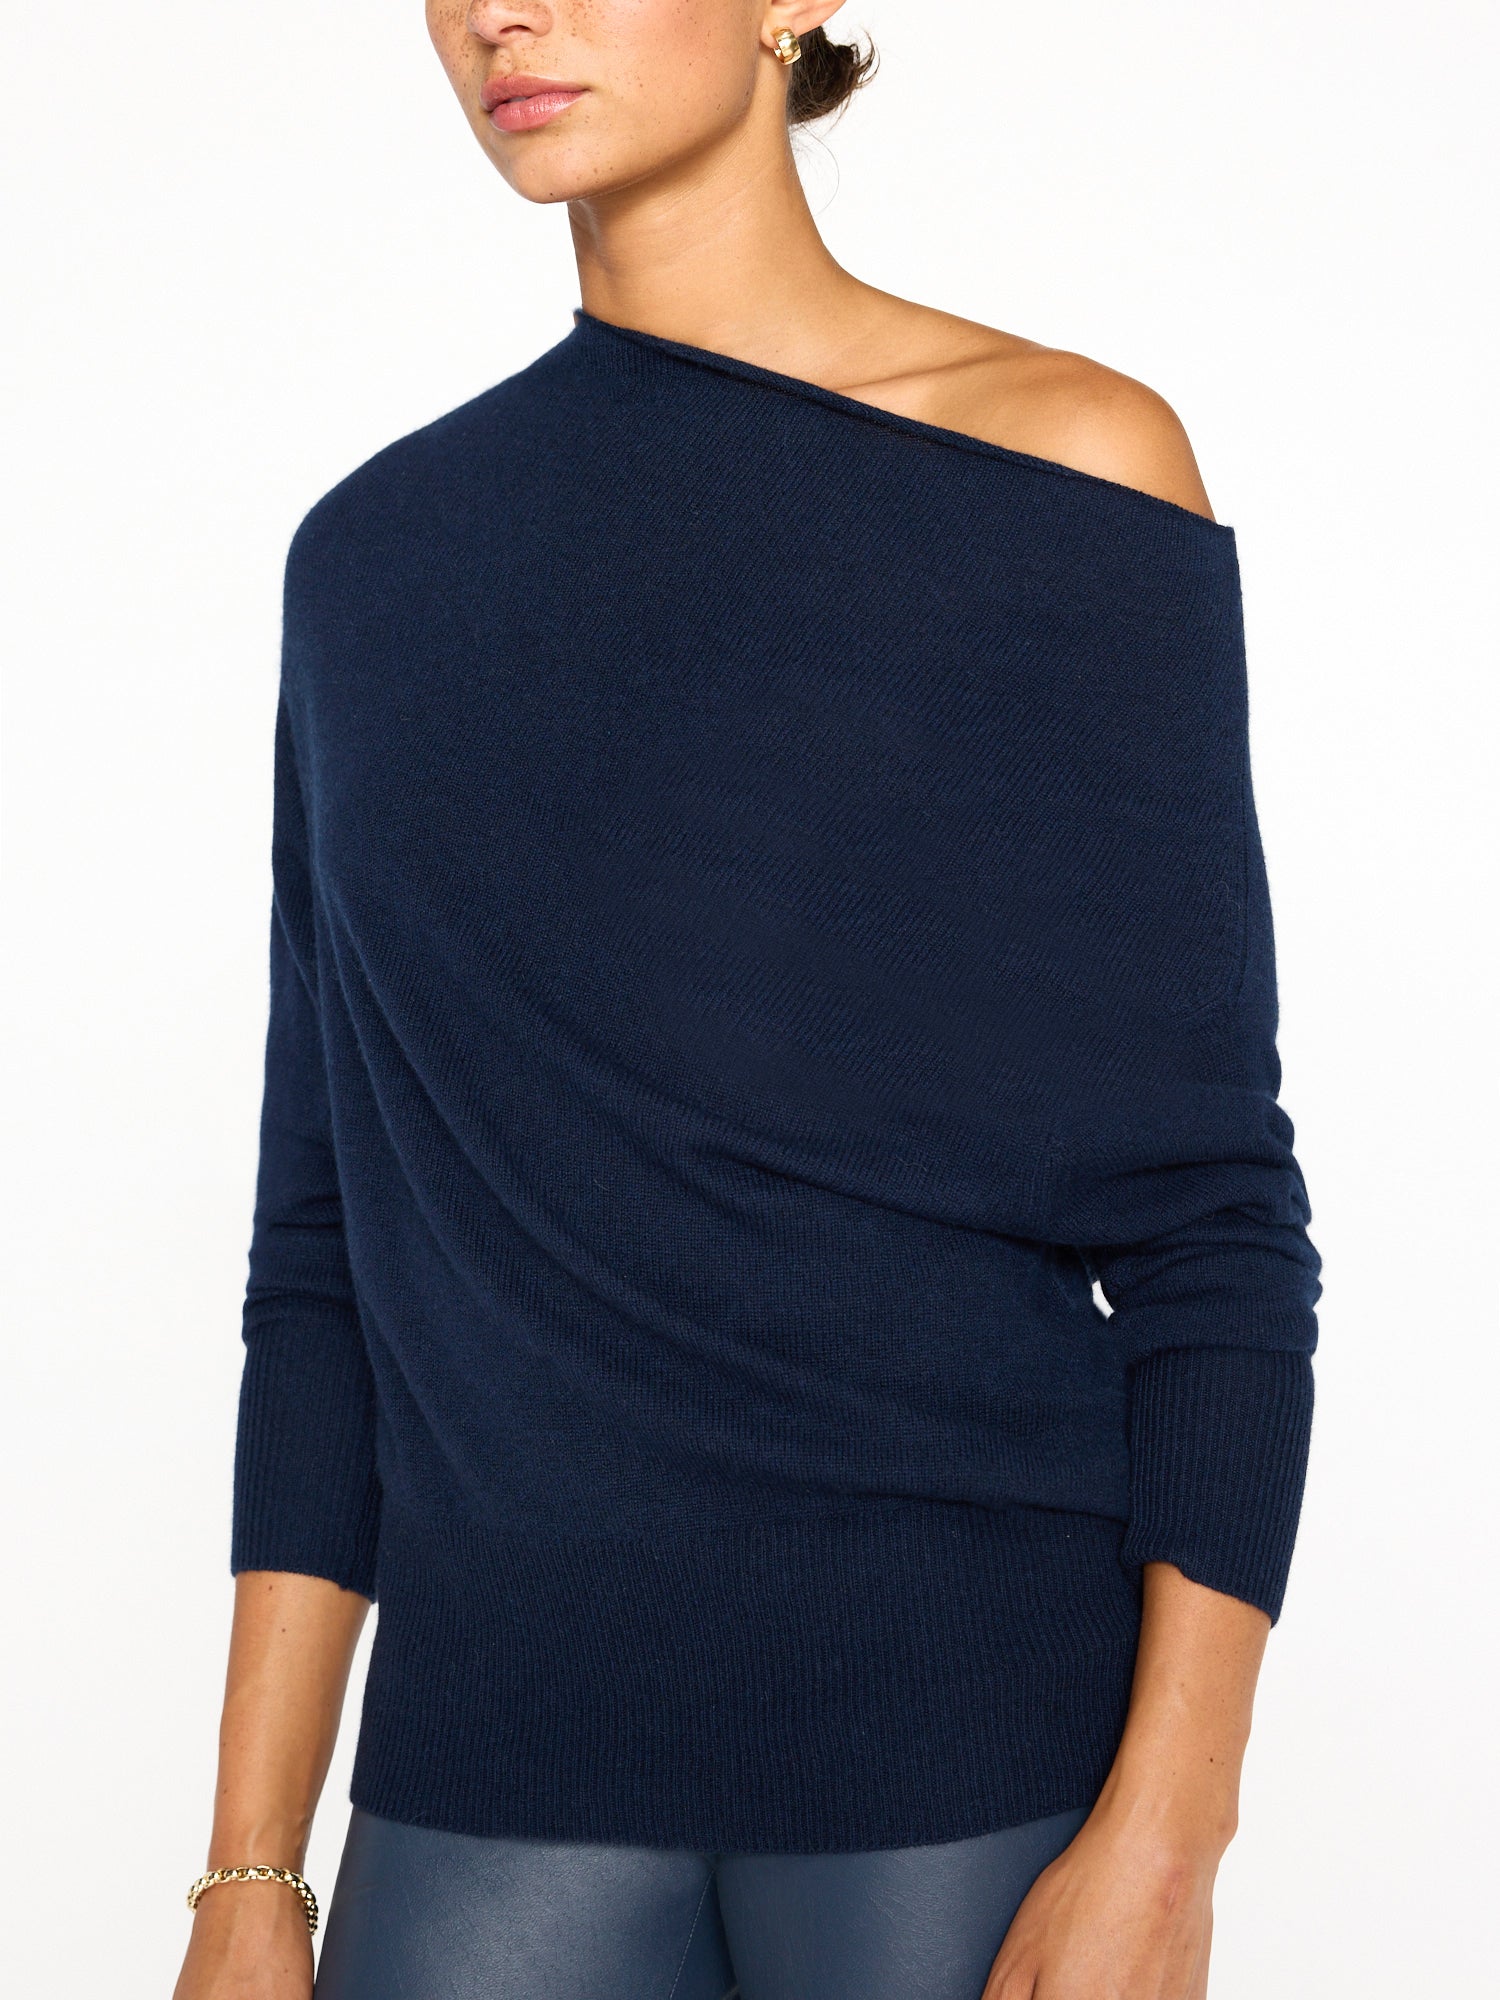 Lori cashmere off shoulder navy sweater front view 2